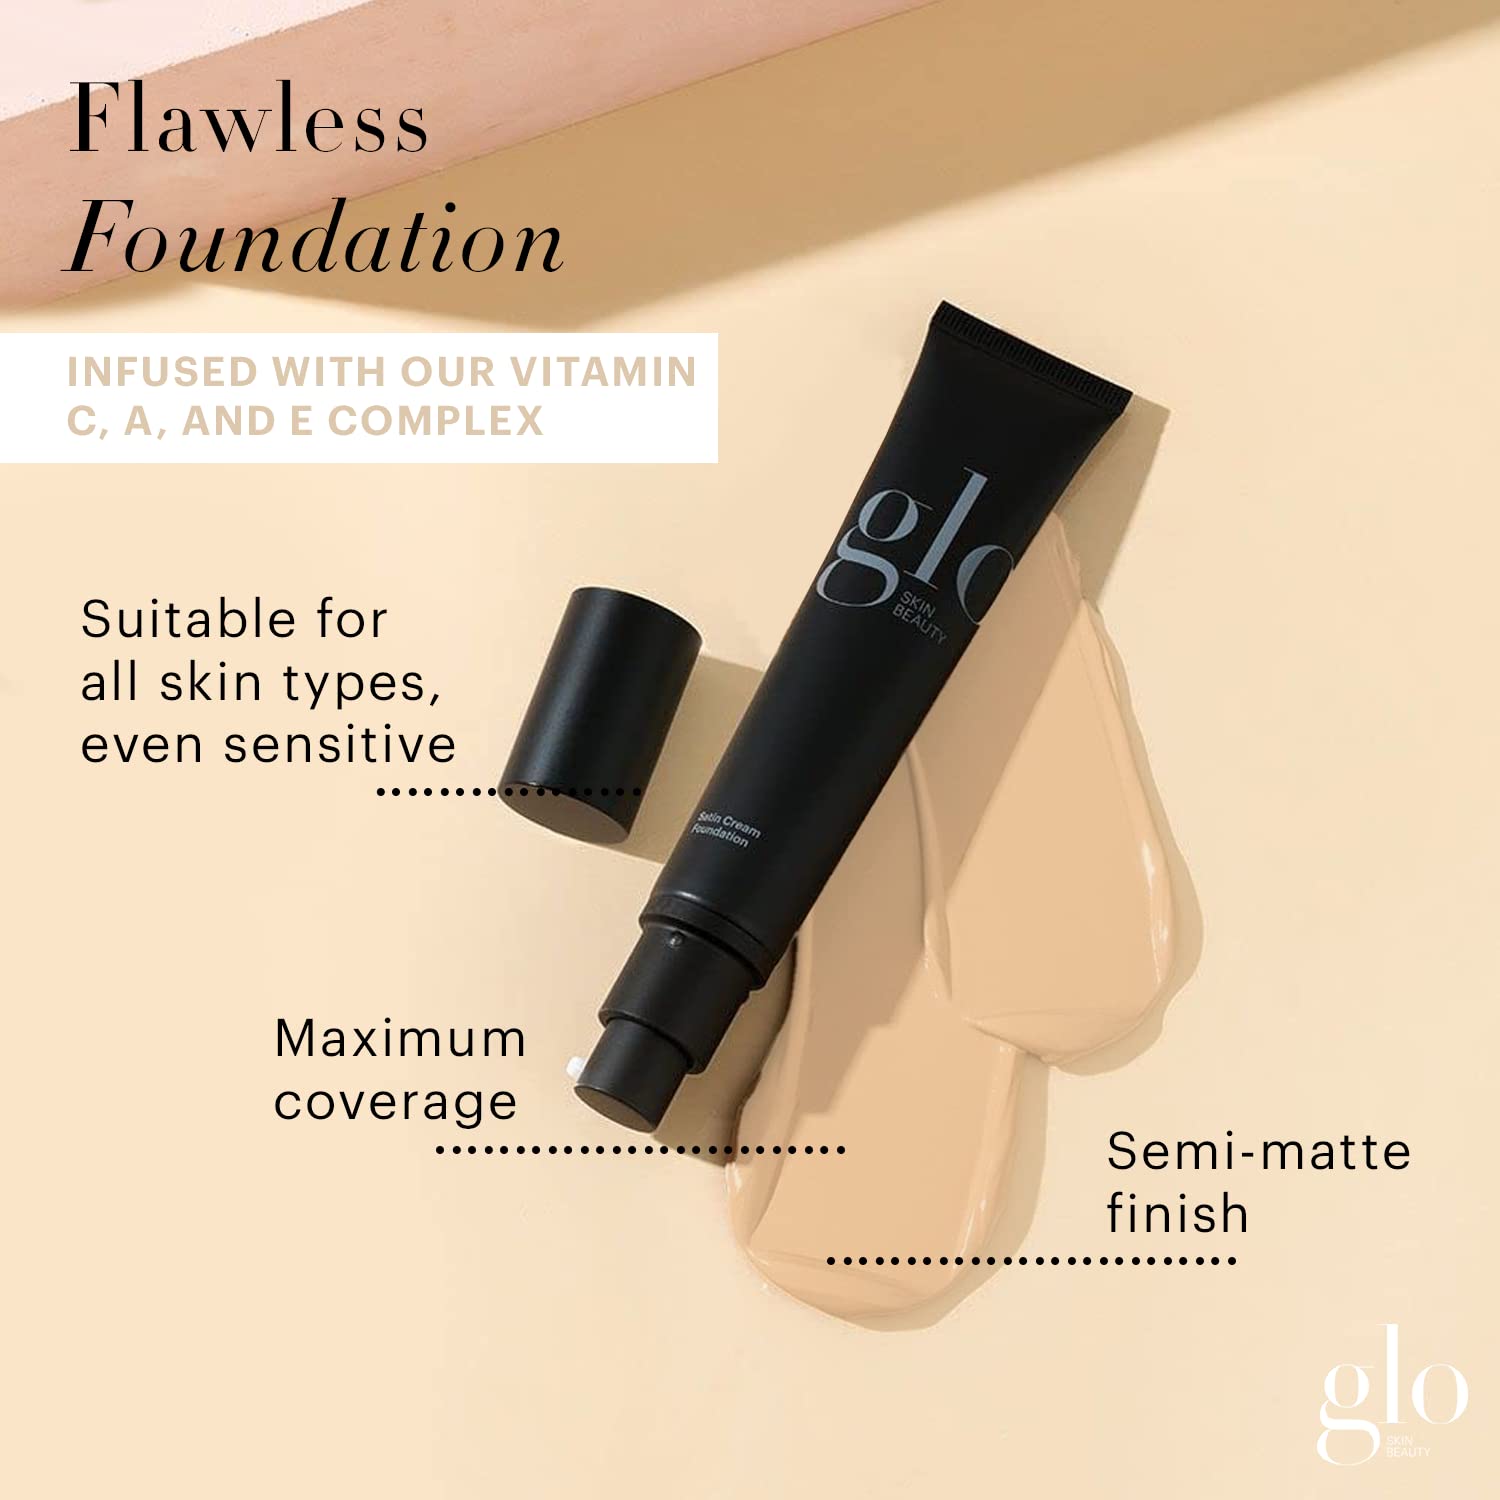 Glo Skin Beauty Satin Cream Foundation Makeup for Face, Natural Light - Full Coverage, Semi Matte Finish, Conceal Blemishes & Even Skin Tone